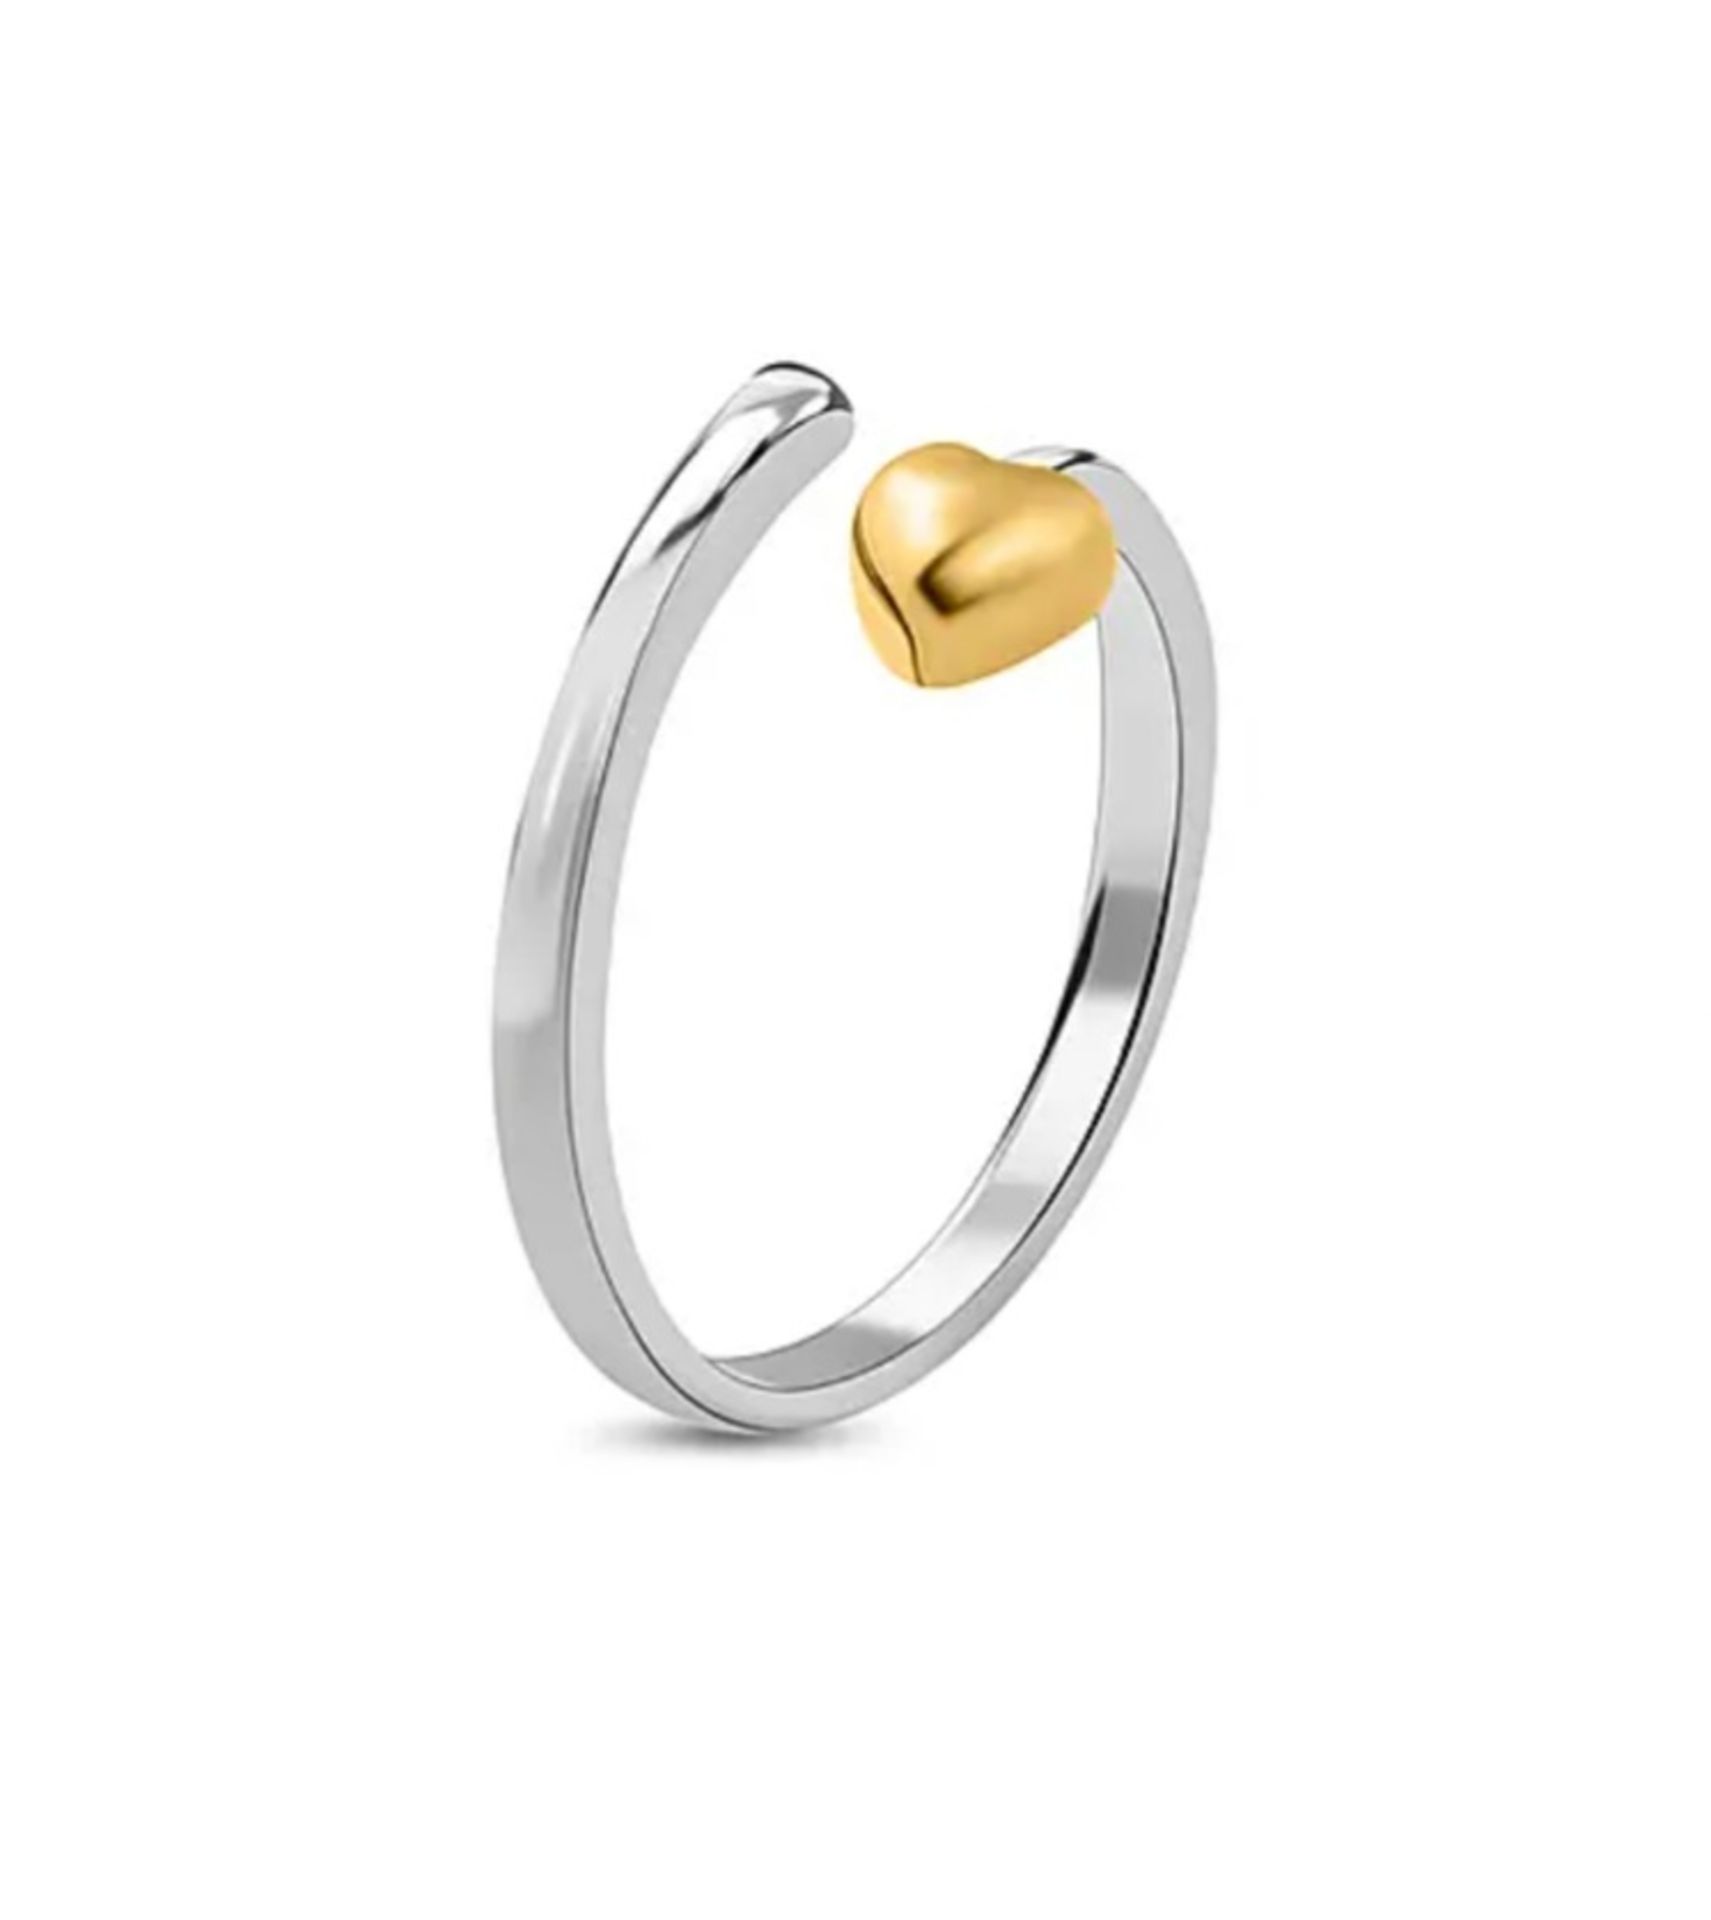 NEW! Platinum and 18K Yellow Gold Vermeil Plated Sterling Silver Adjustable Heart Ring - Image 4 of 5